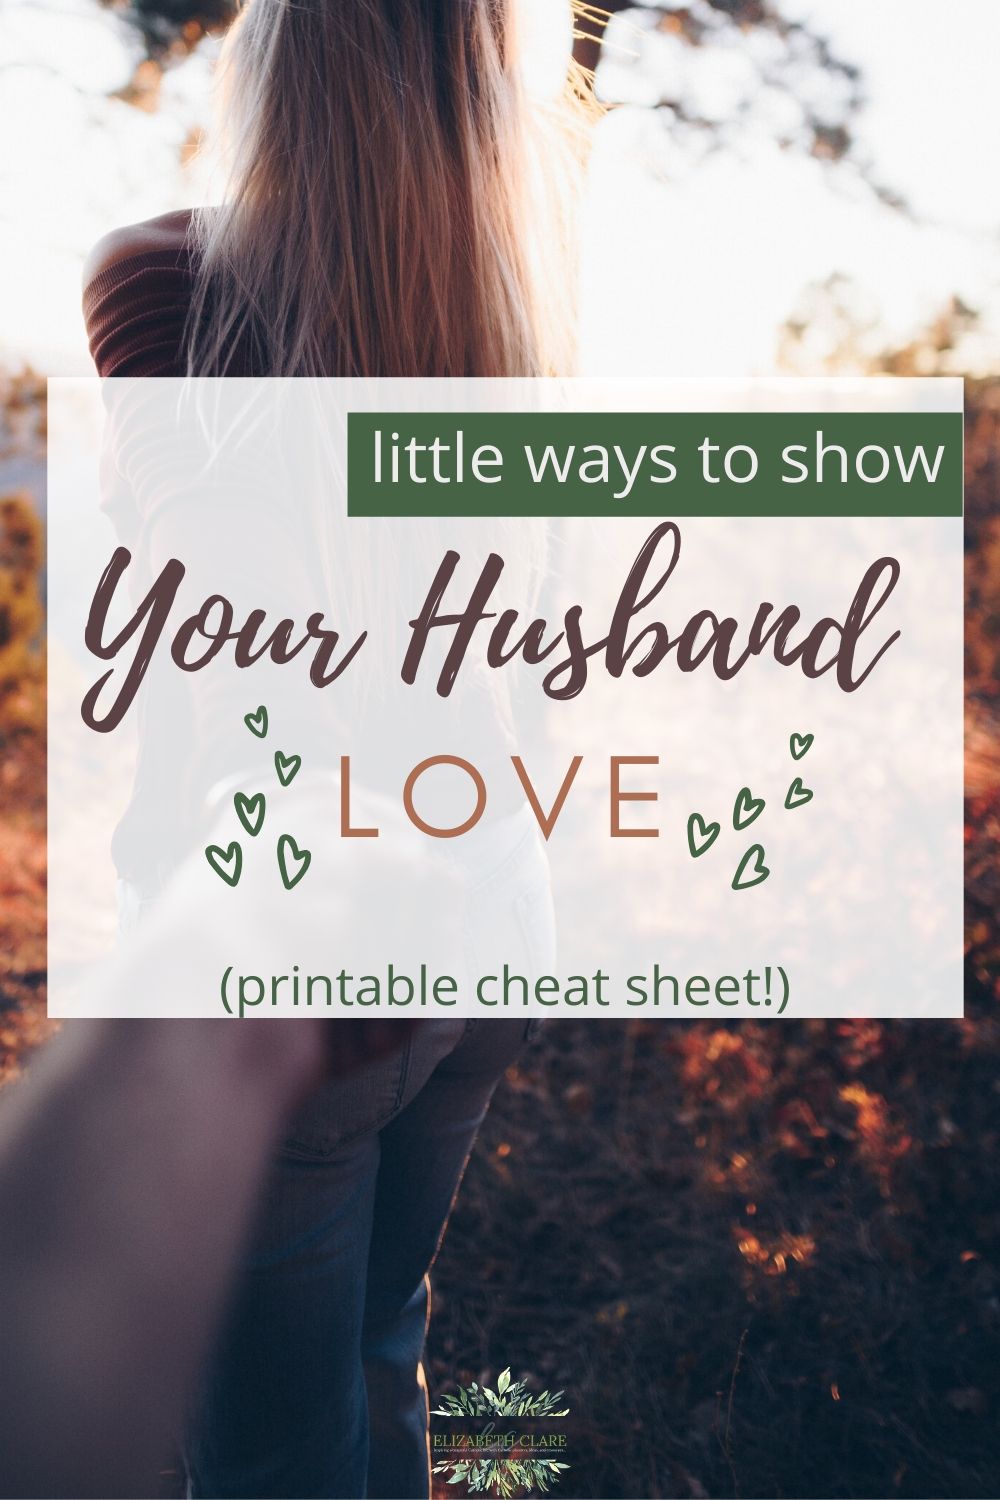 65 Little Ways To Show Your Husband You Love Him Elizabeth Clare